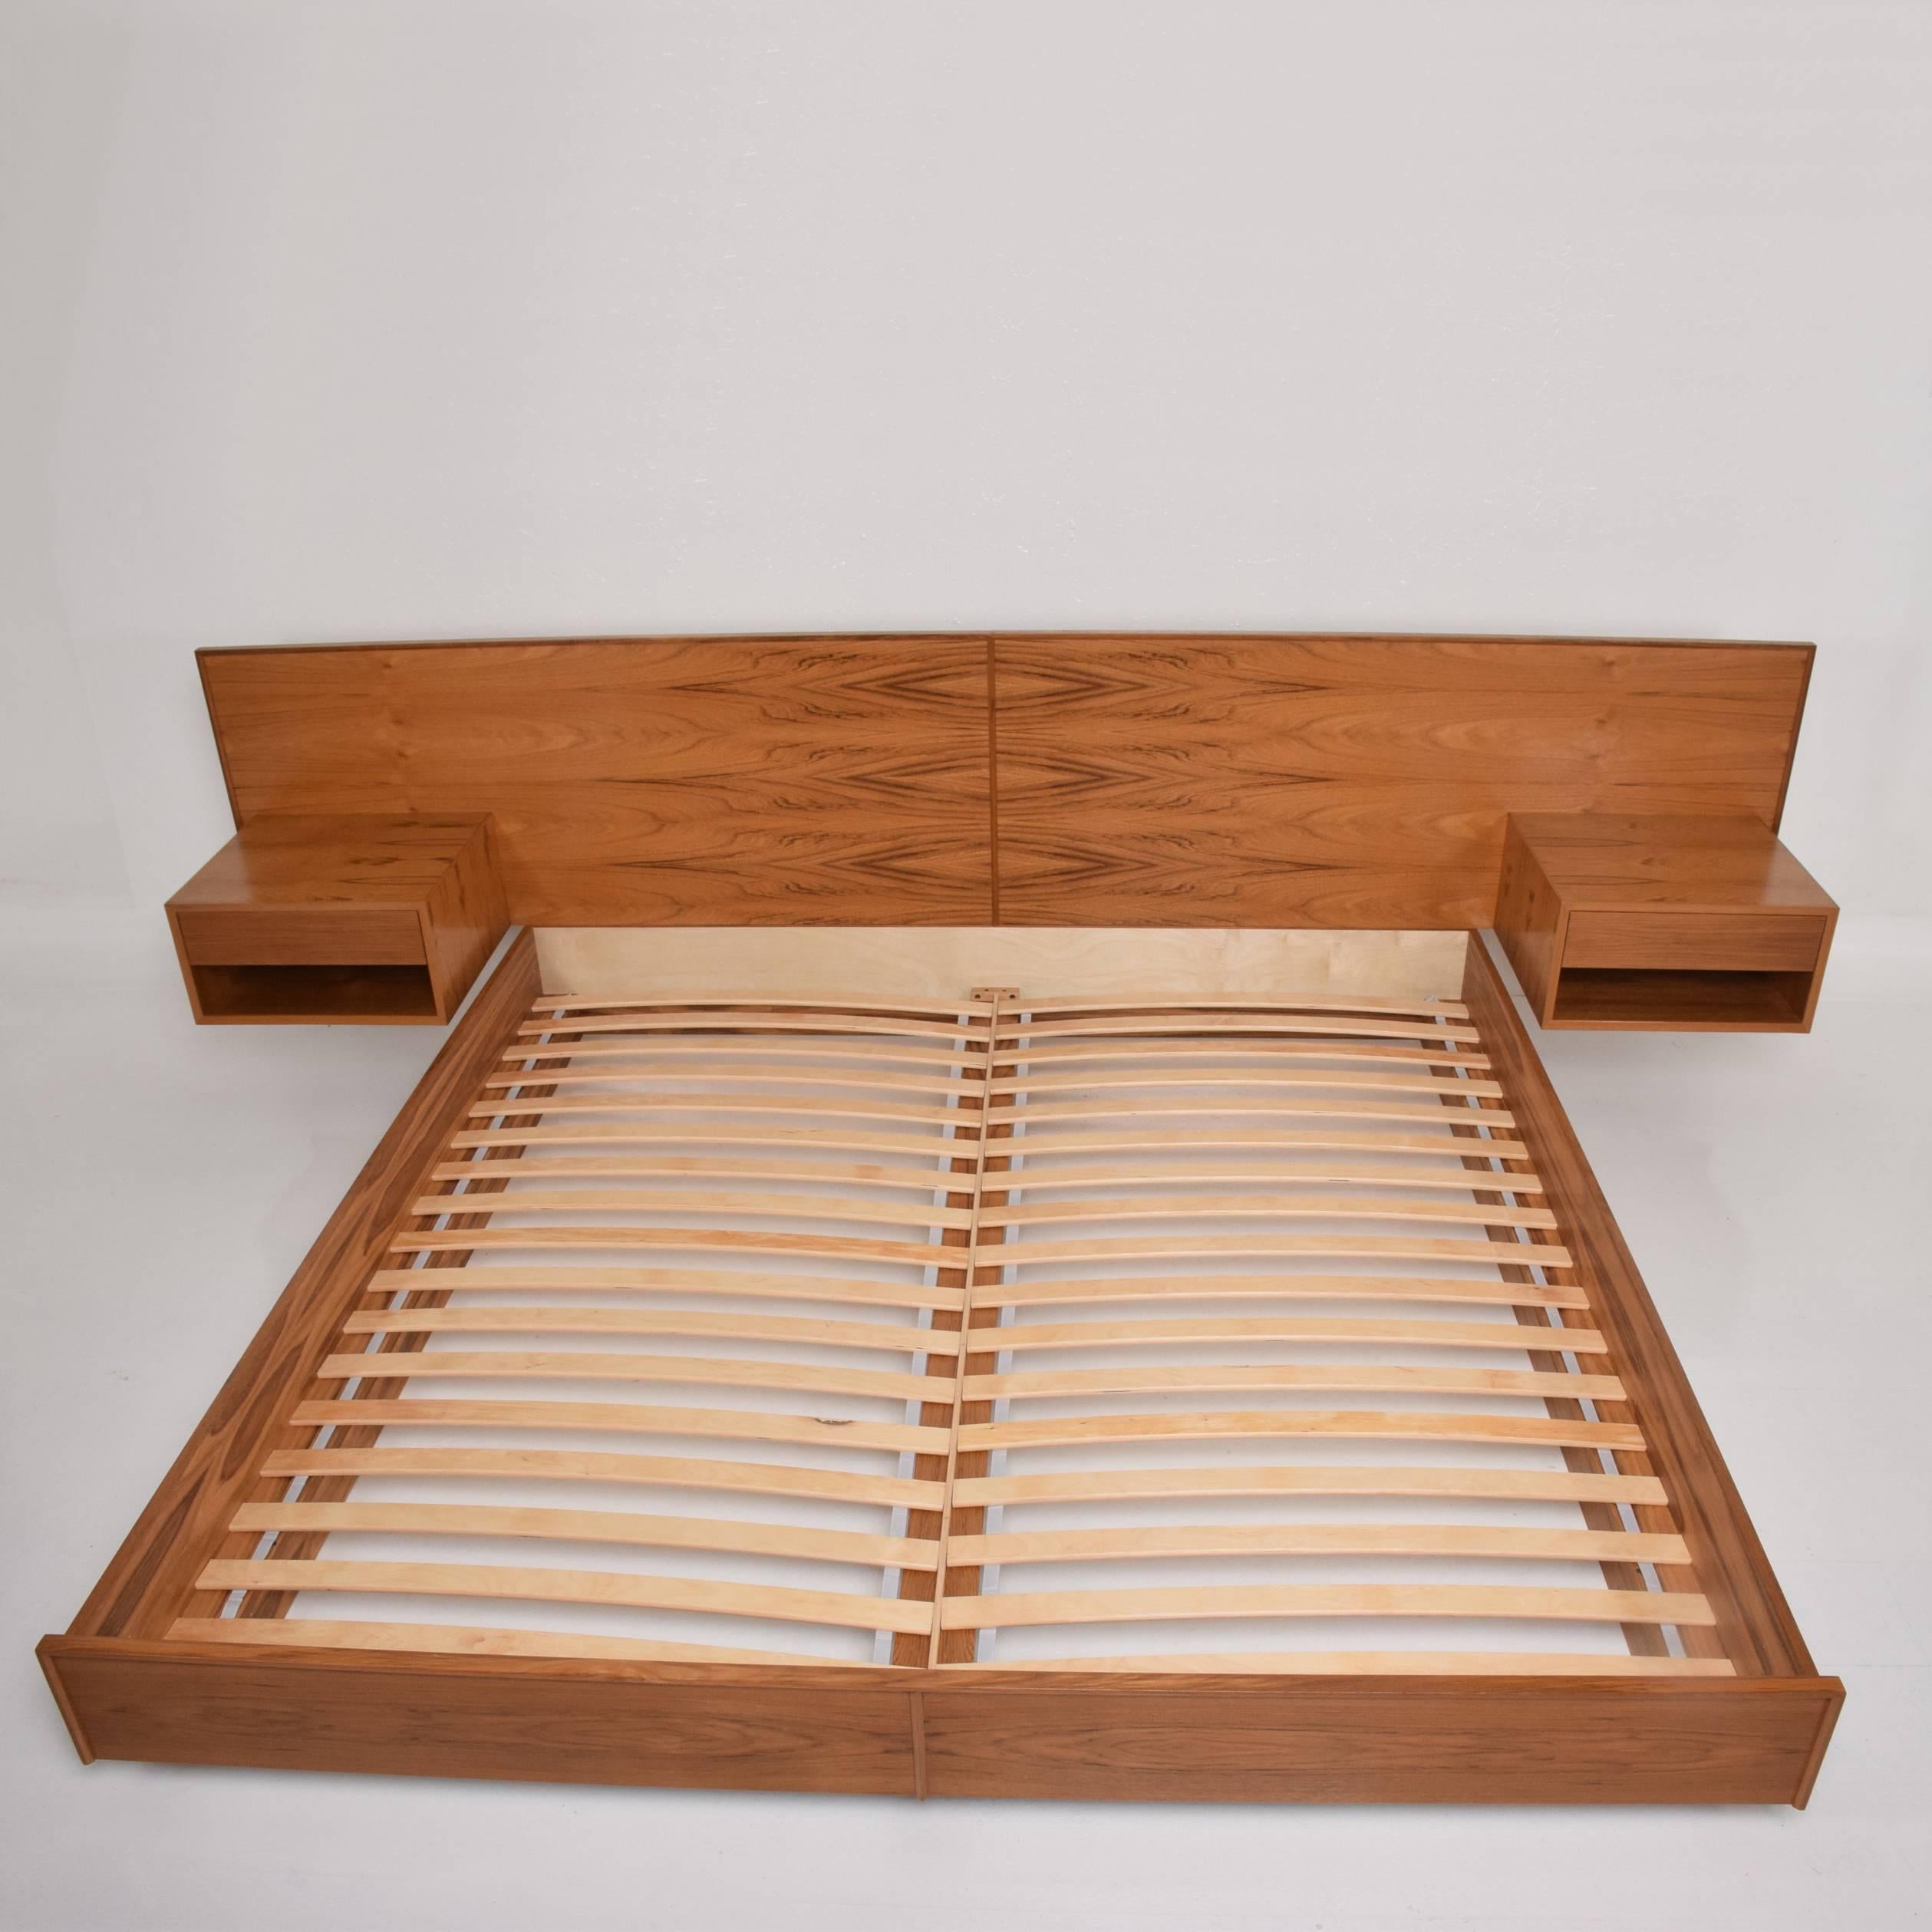 A custom platform bed. Custom built to meet your specifications. 
Available in King or Queen, oak teak or walnut wood. 

 